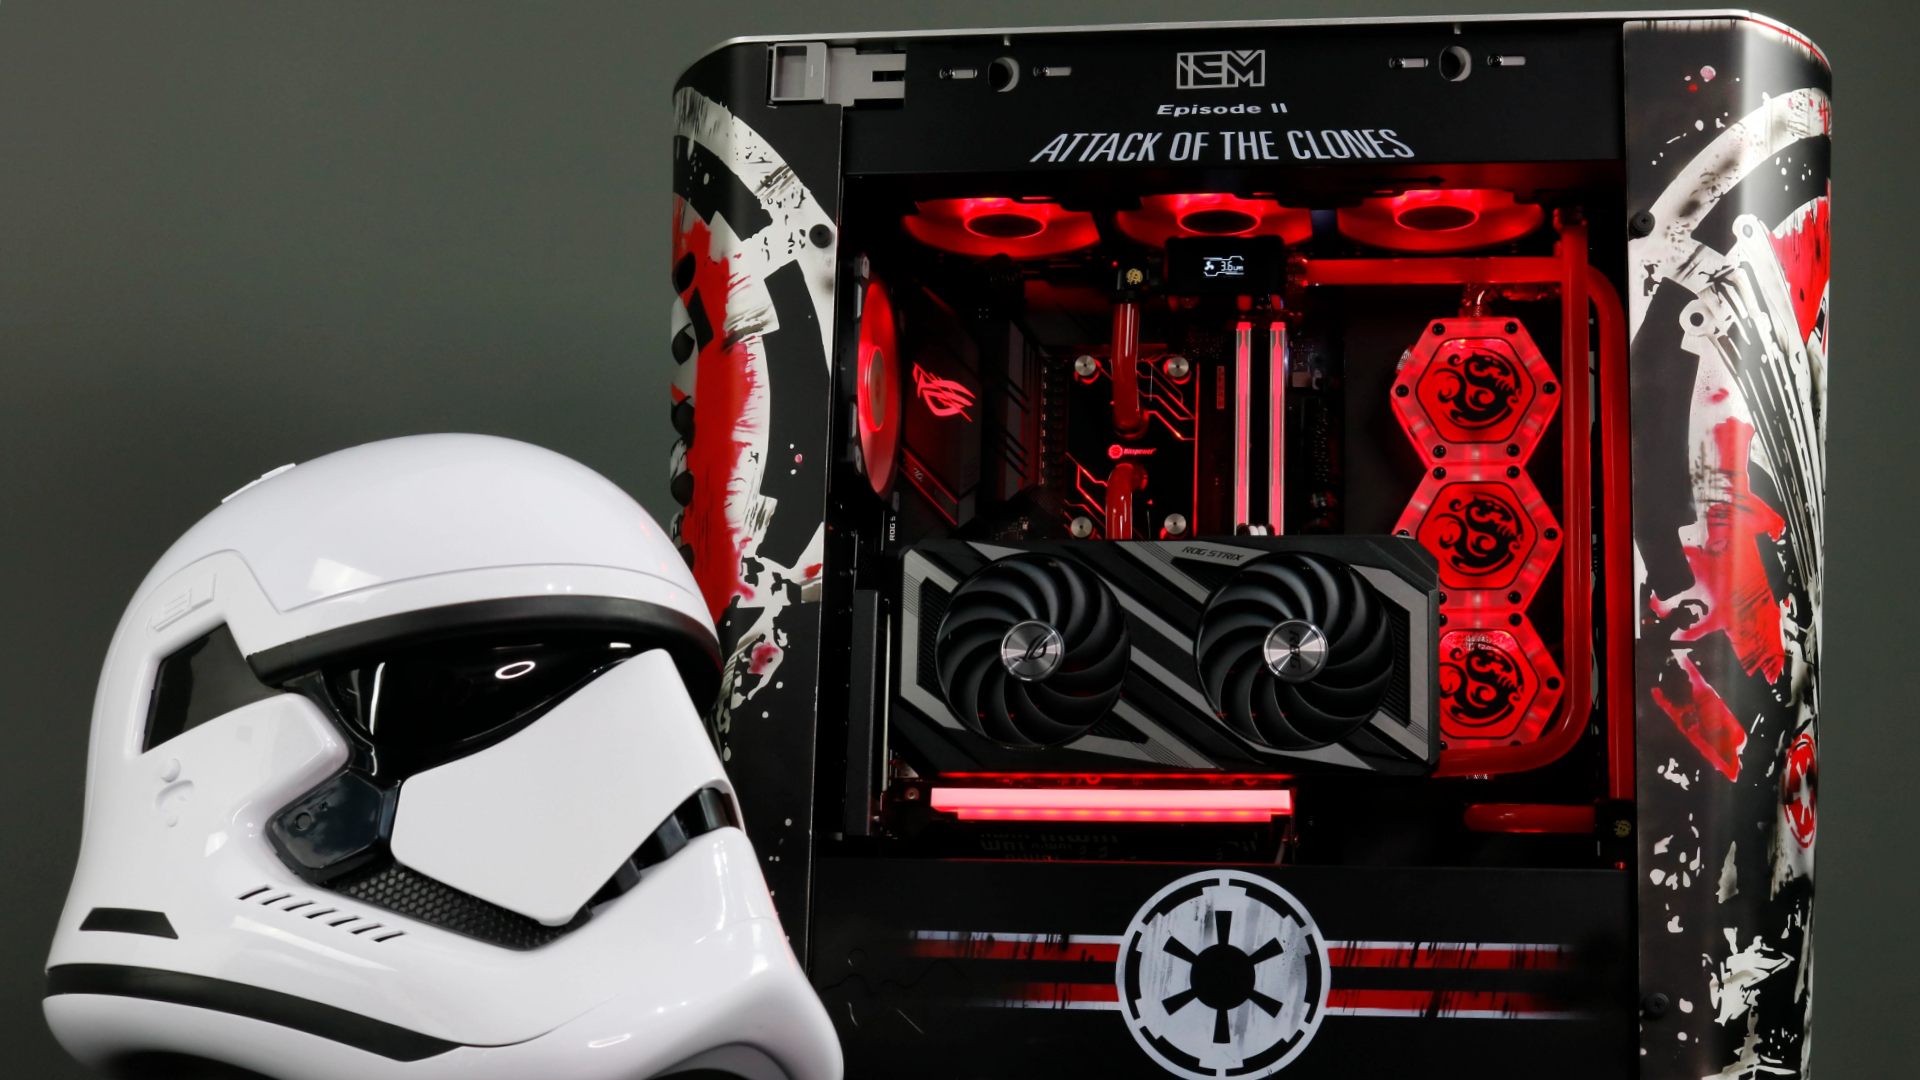 This Star Wars prequel gaming PC is a force to be reckoned with